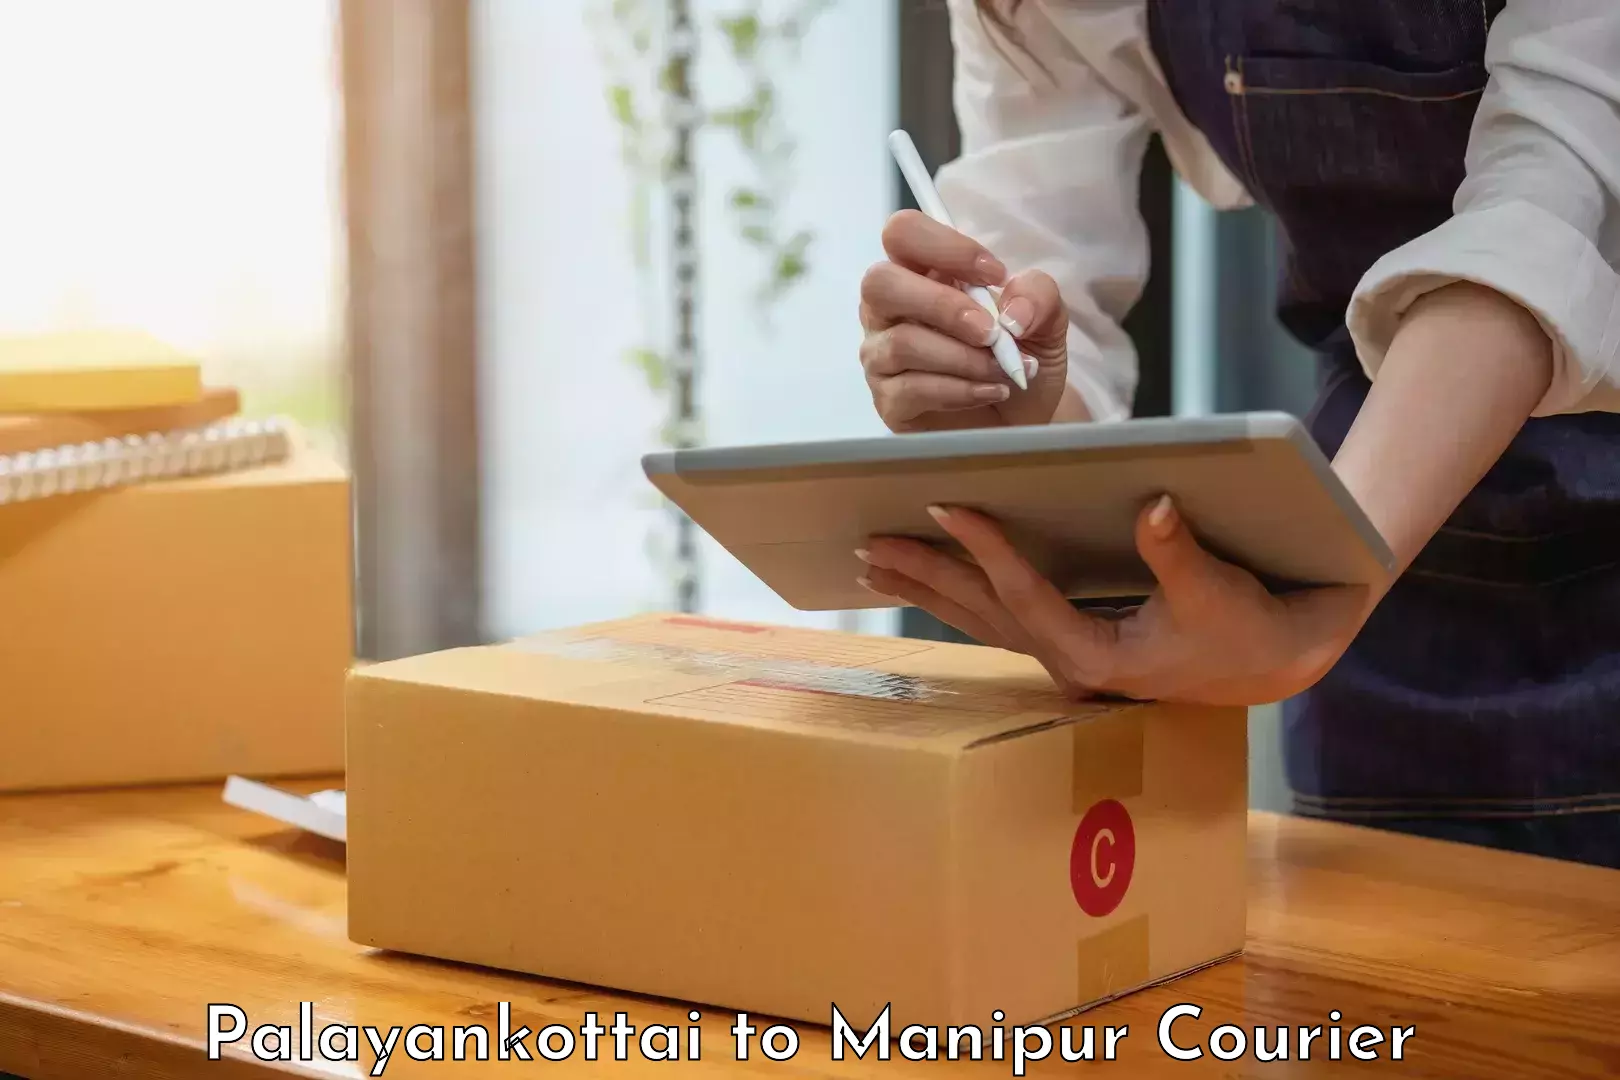 Smart courier technologies Palayankottai to Imphal